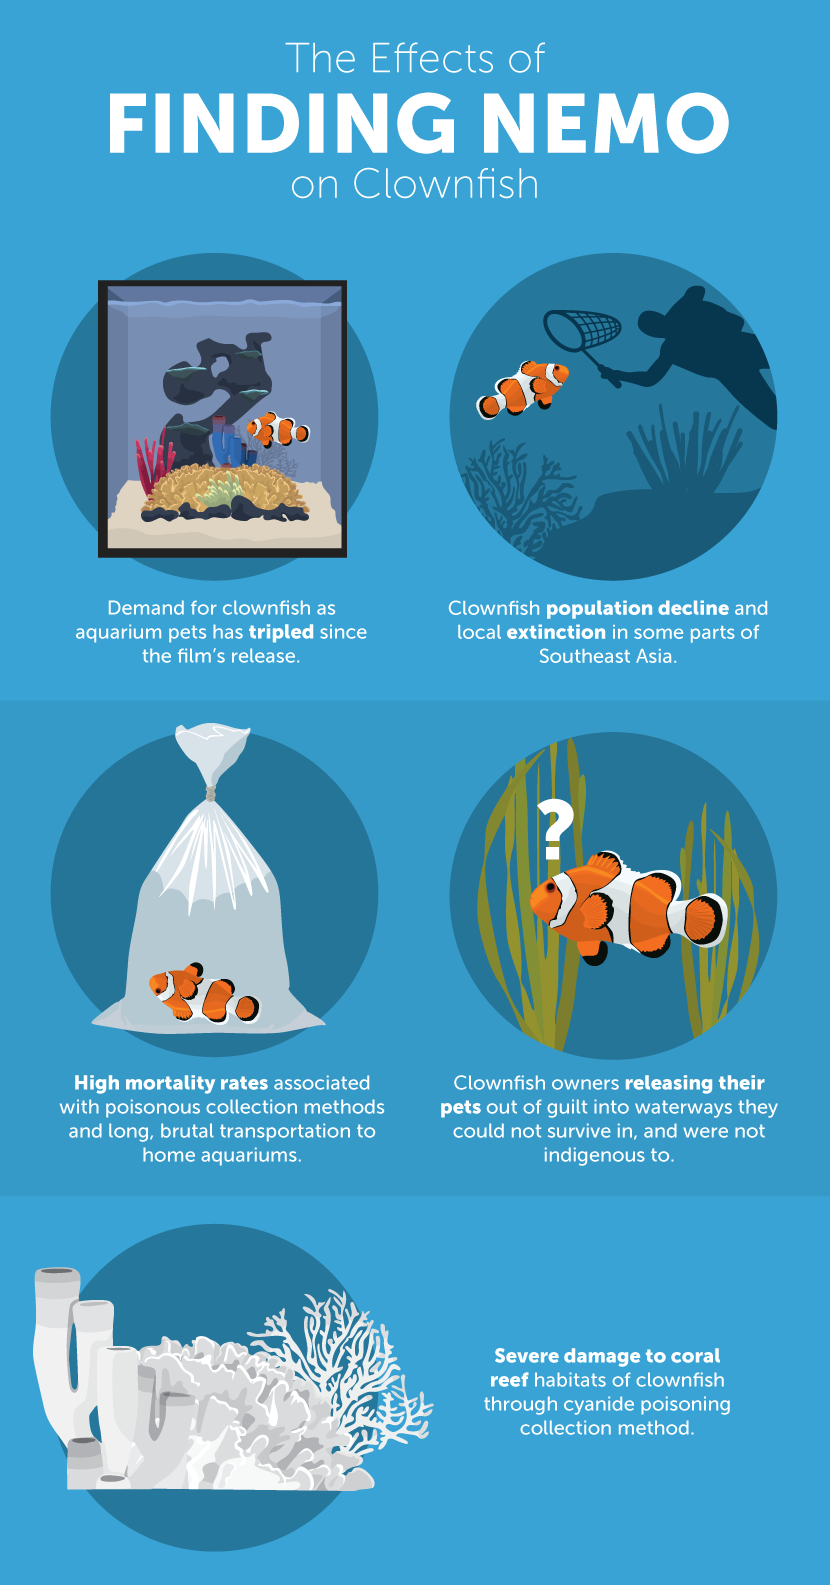 Losing Nemo and Dory - The Effects of Finding Nemo on Clownfish